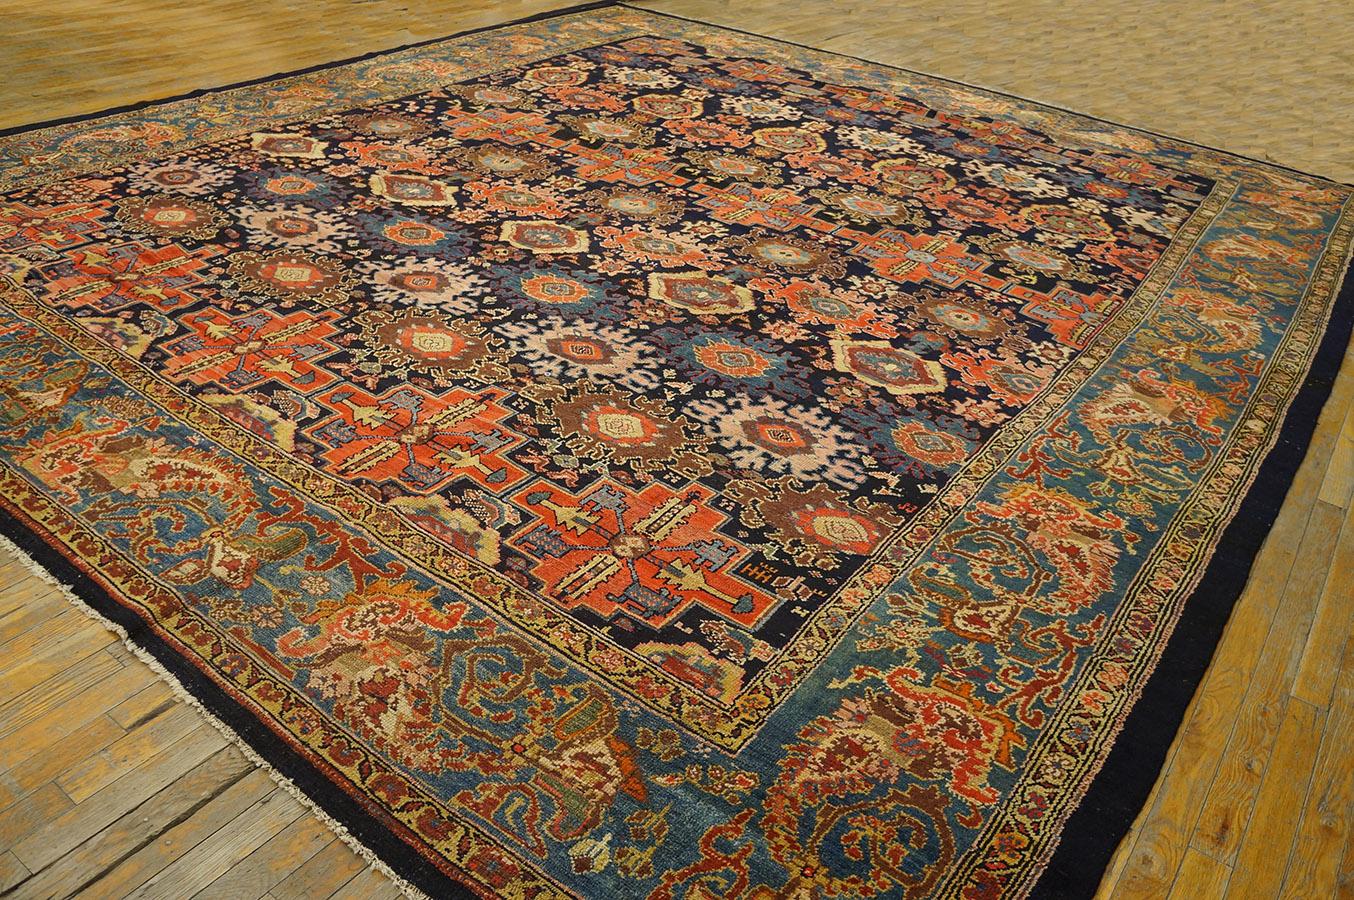 Hand-Knotted 19th Century Persian Malayer Carpet ( 12' x 13'9